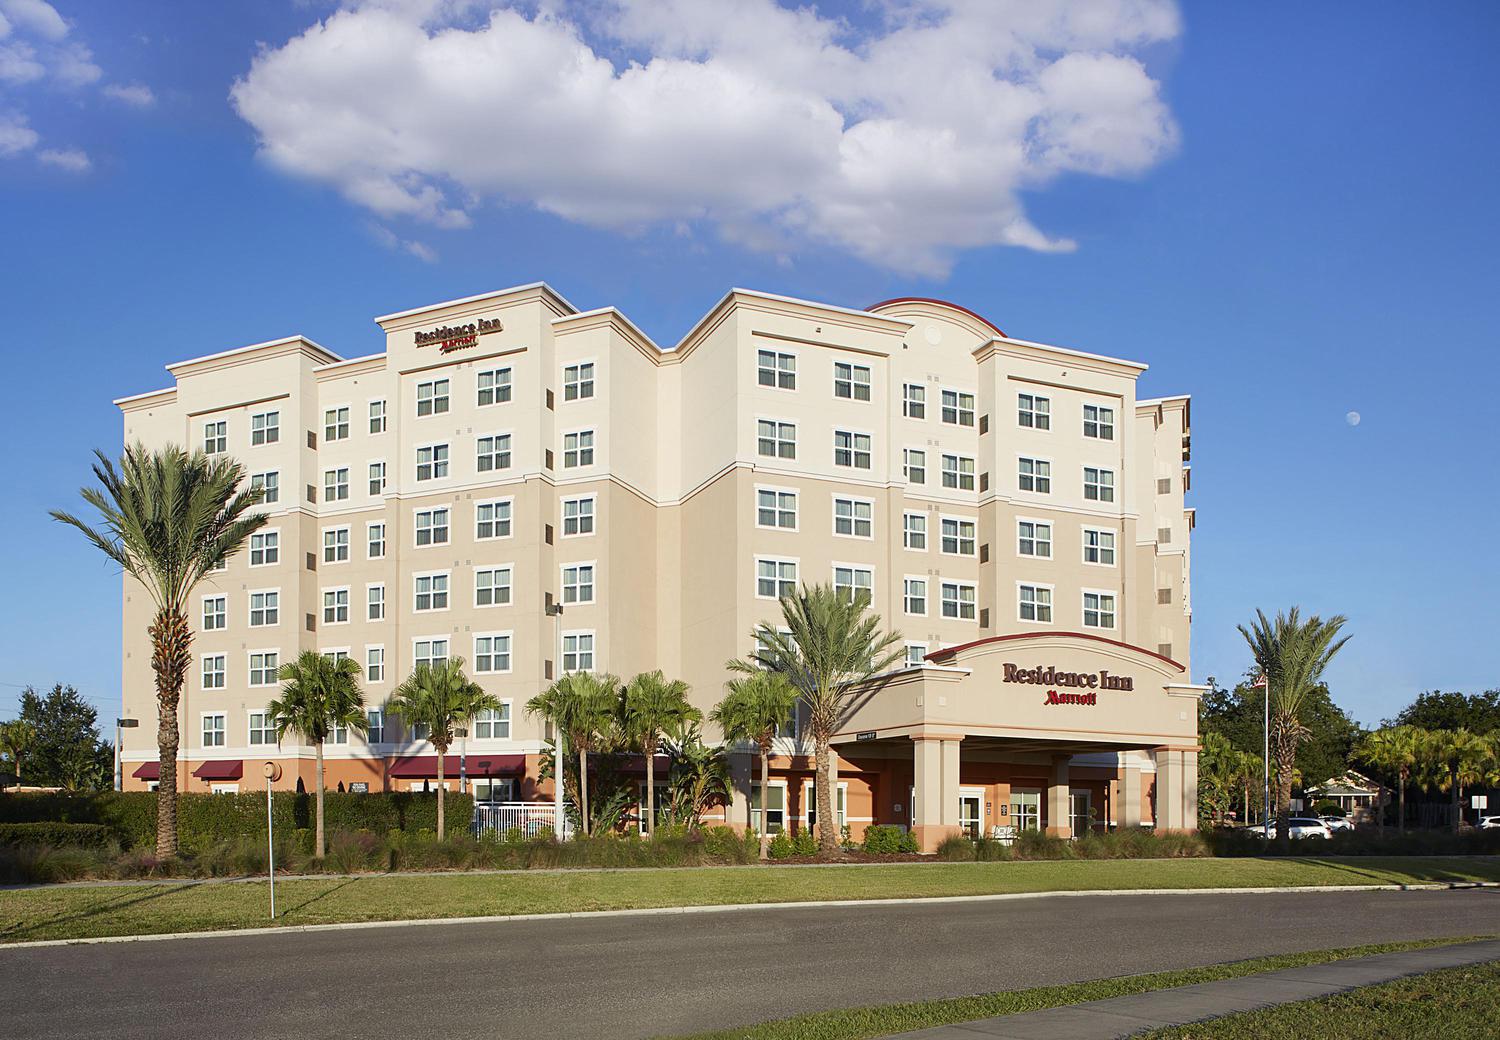 Residence Inn Clearwater Downtown  Clearwater  Jobs Hospitality Online